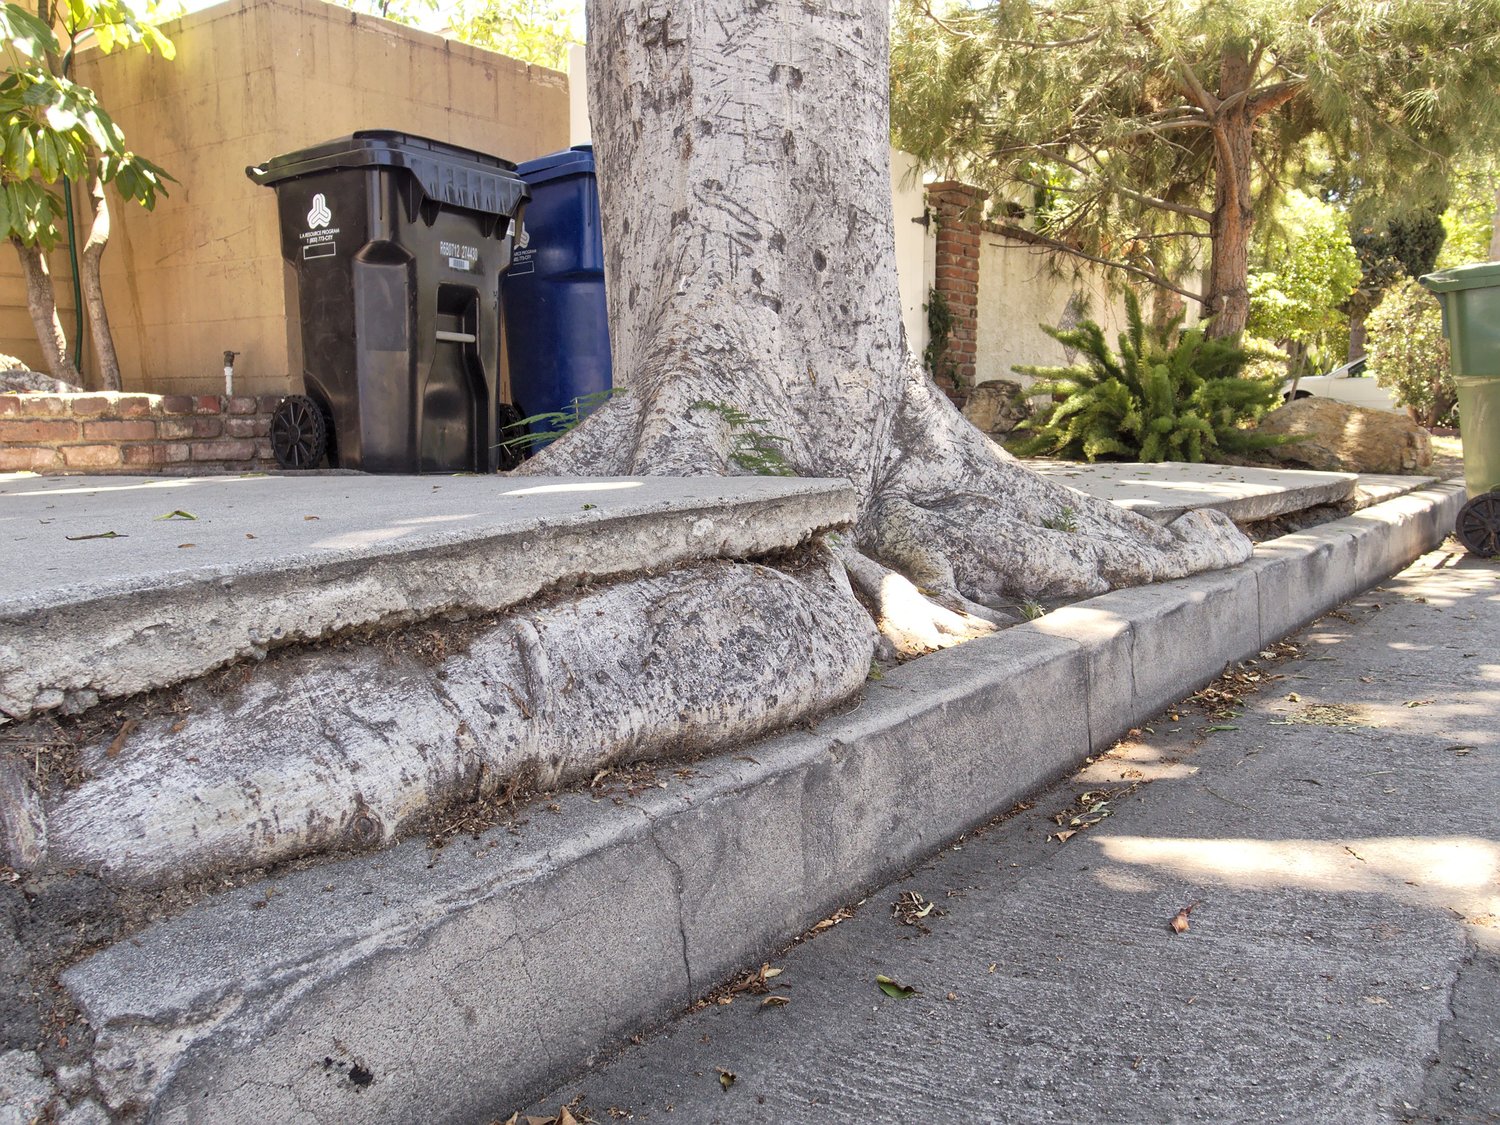 The Village of Sea Cliff is considering amending a law dating back decades that divides the financial burden of sidewalk and other “right of way” repairs between homeowners and the village. The amendment would shift the burden completely to residents.